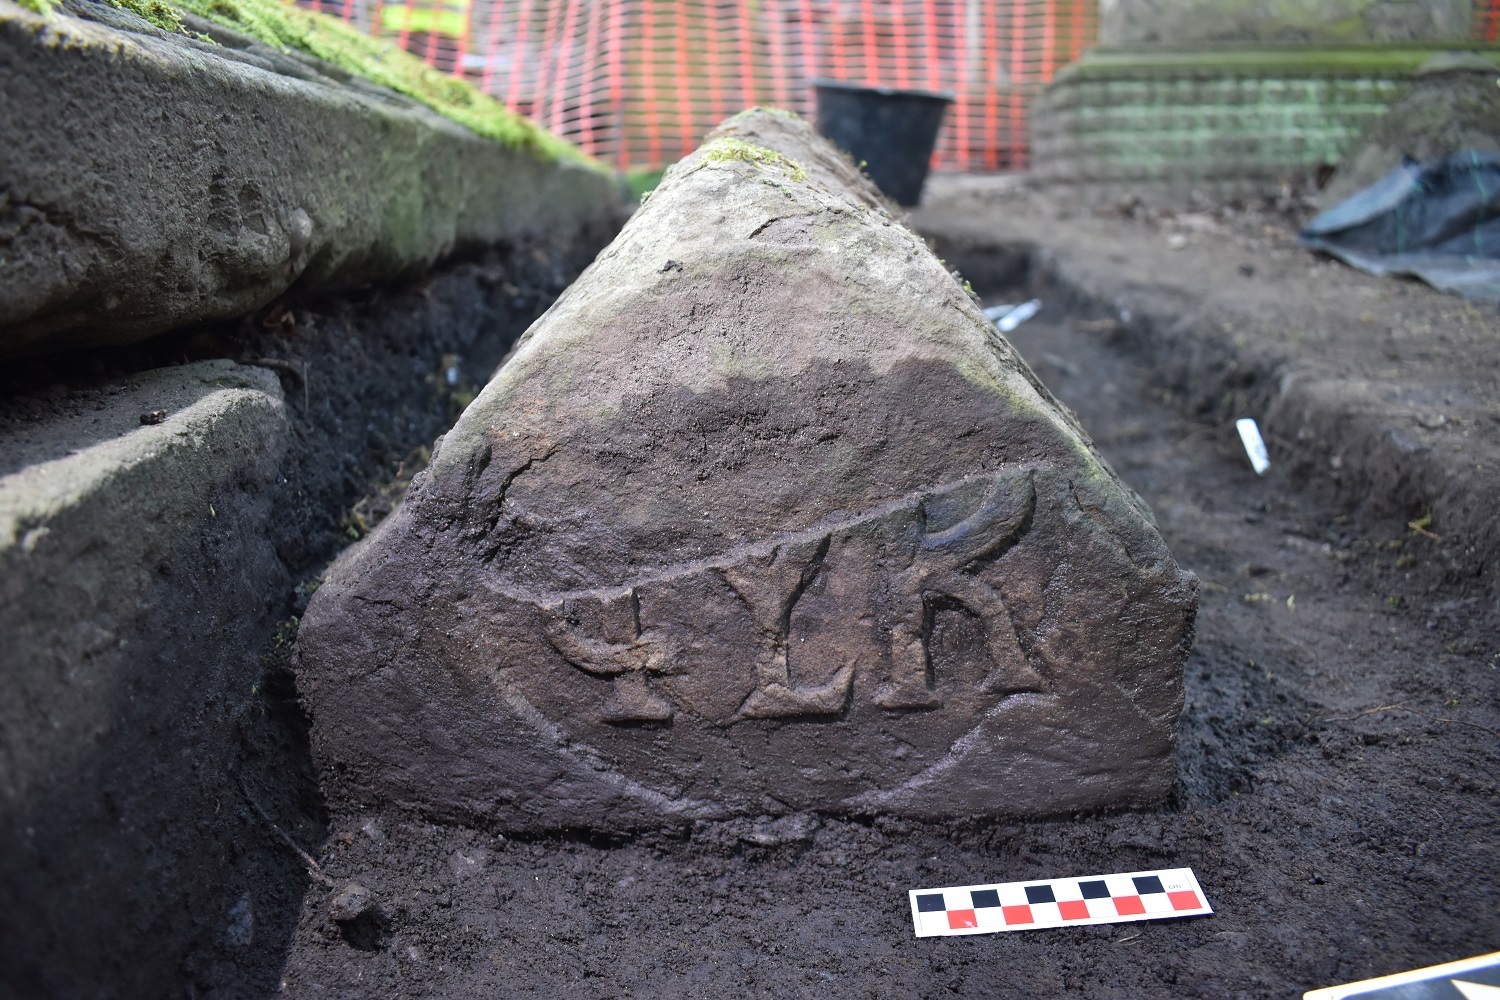 The Medieval stone was found in April 2017